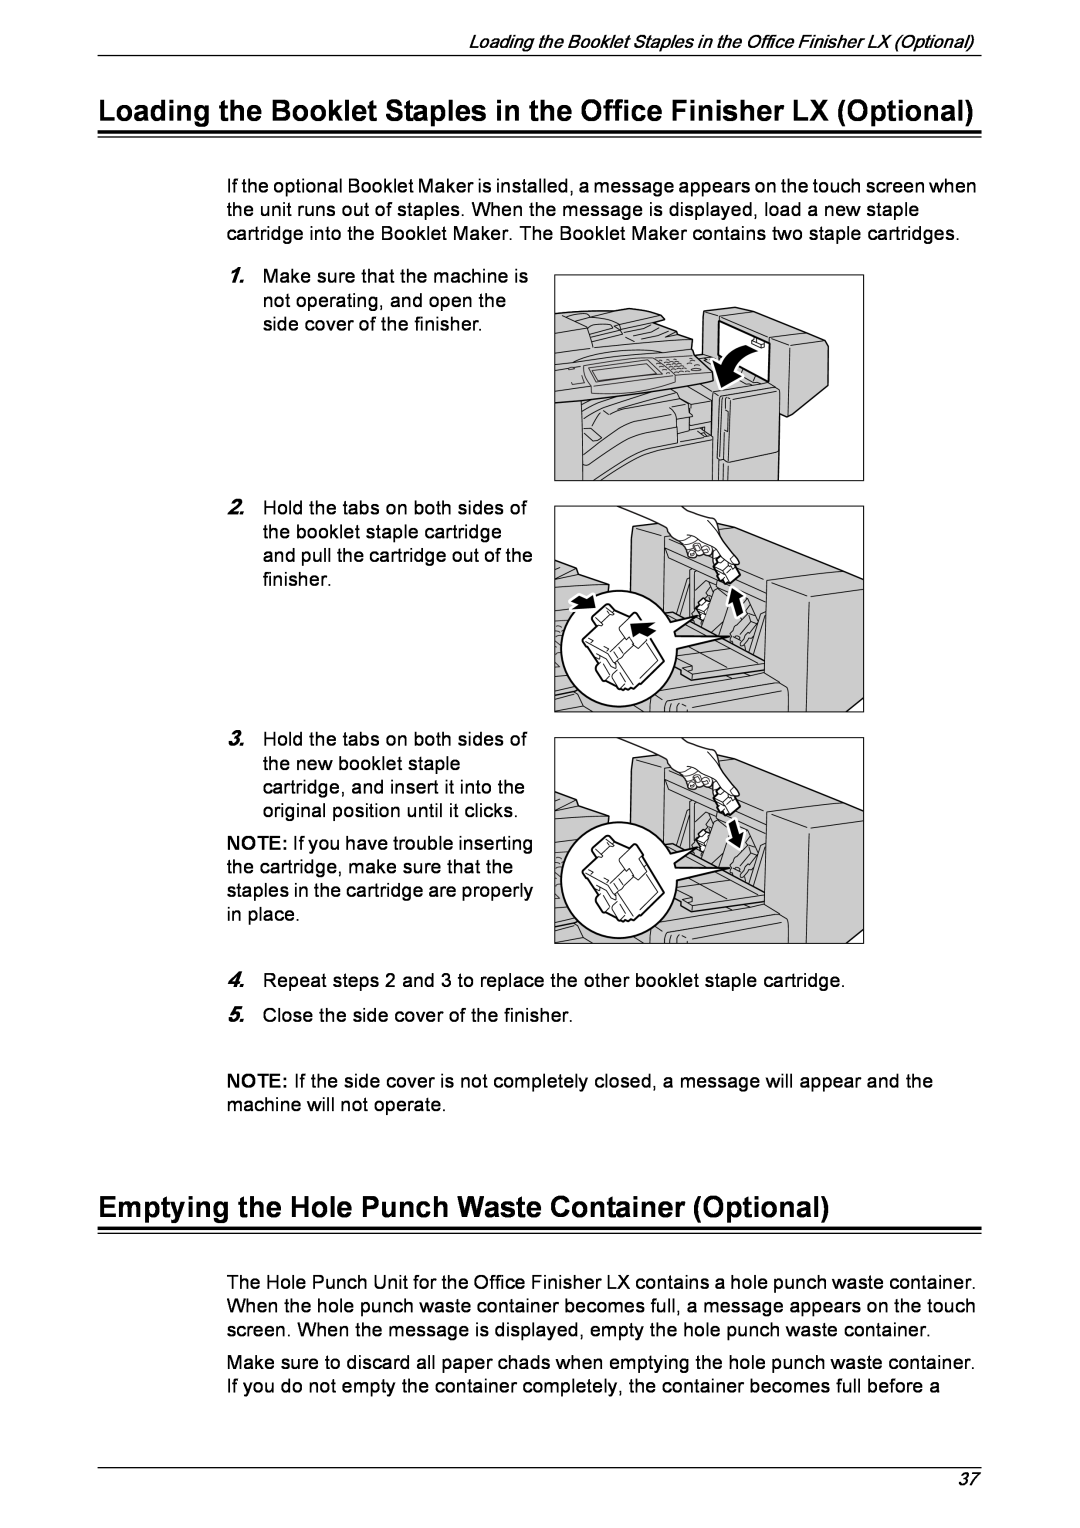 Xerox 5222 manual Emptying the Hole Punch Waste Container Optional 